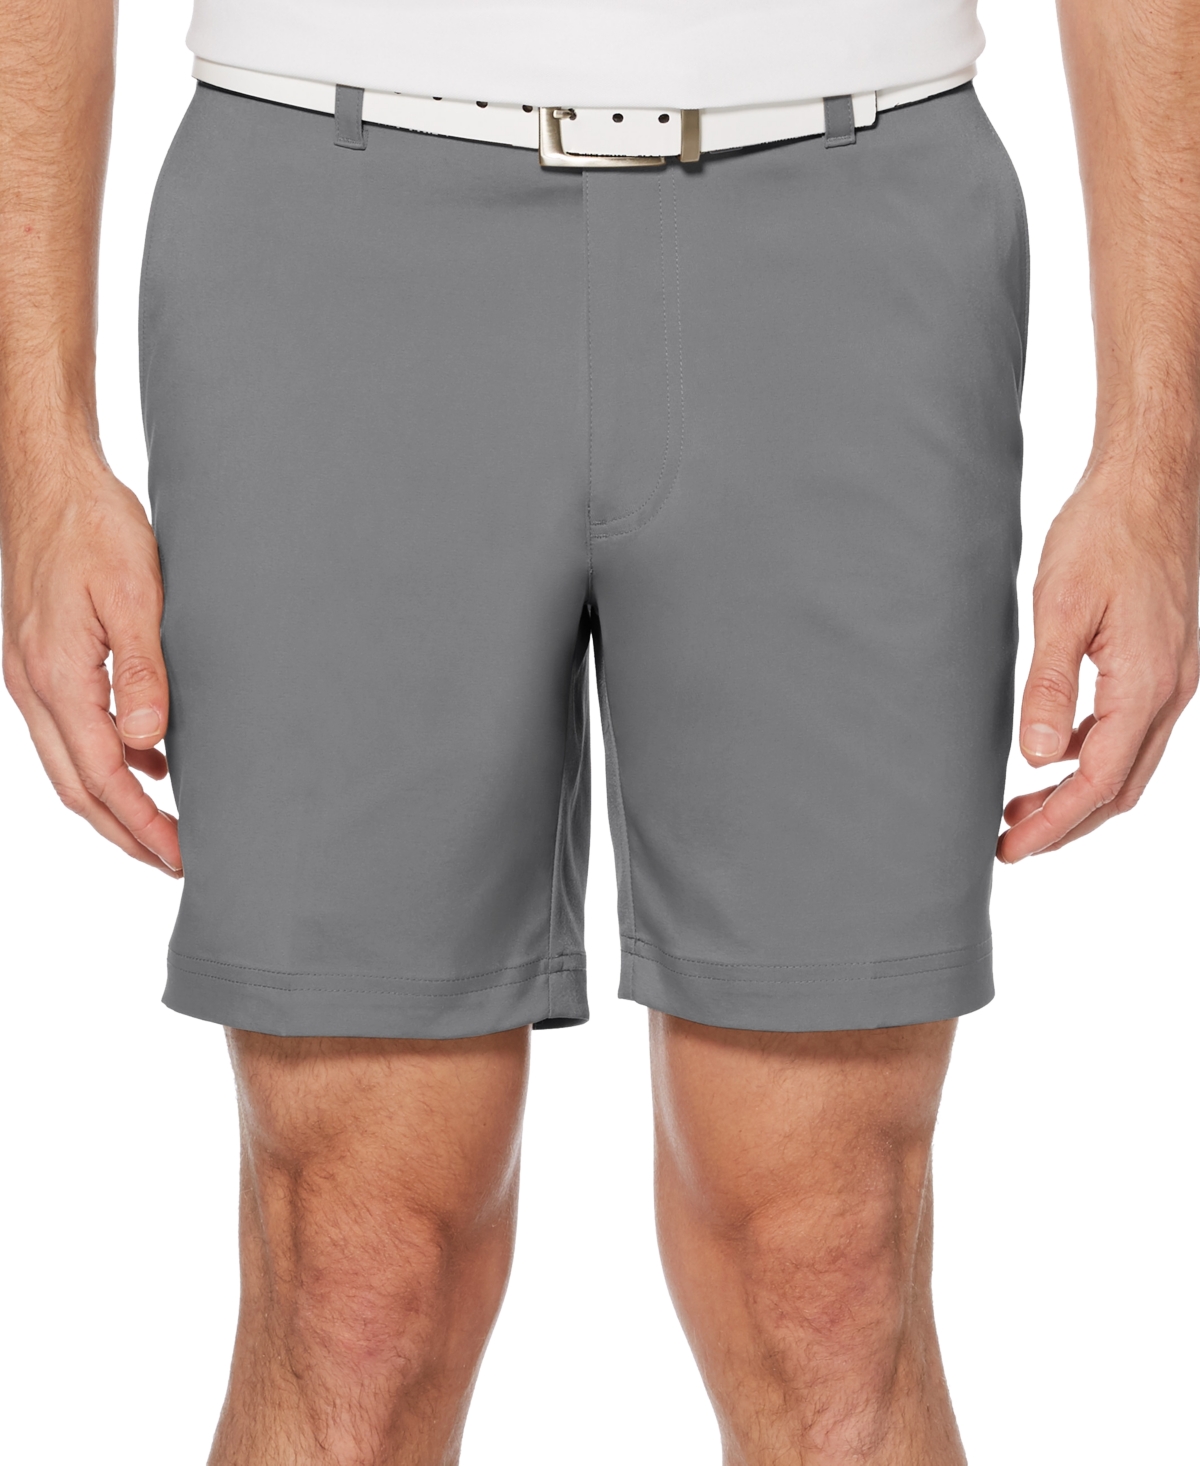 Men's 7" Flat Front Golf Short With Active Waistband - Navy